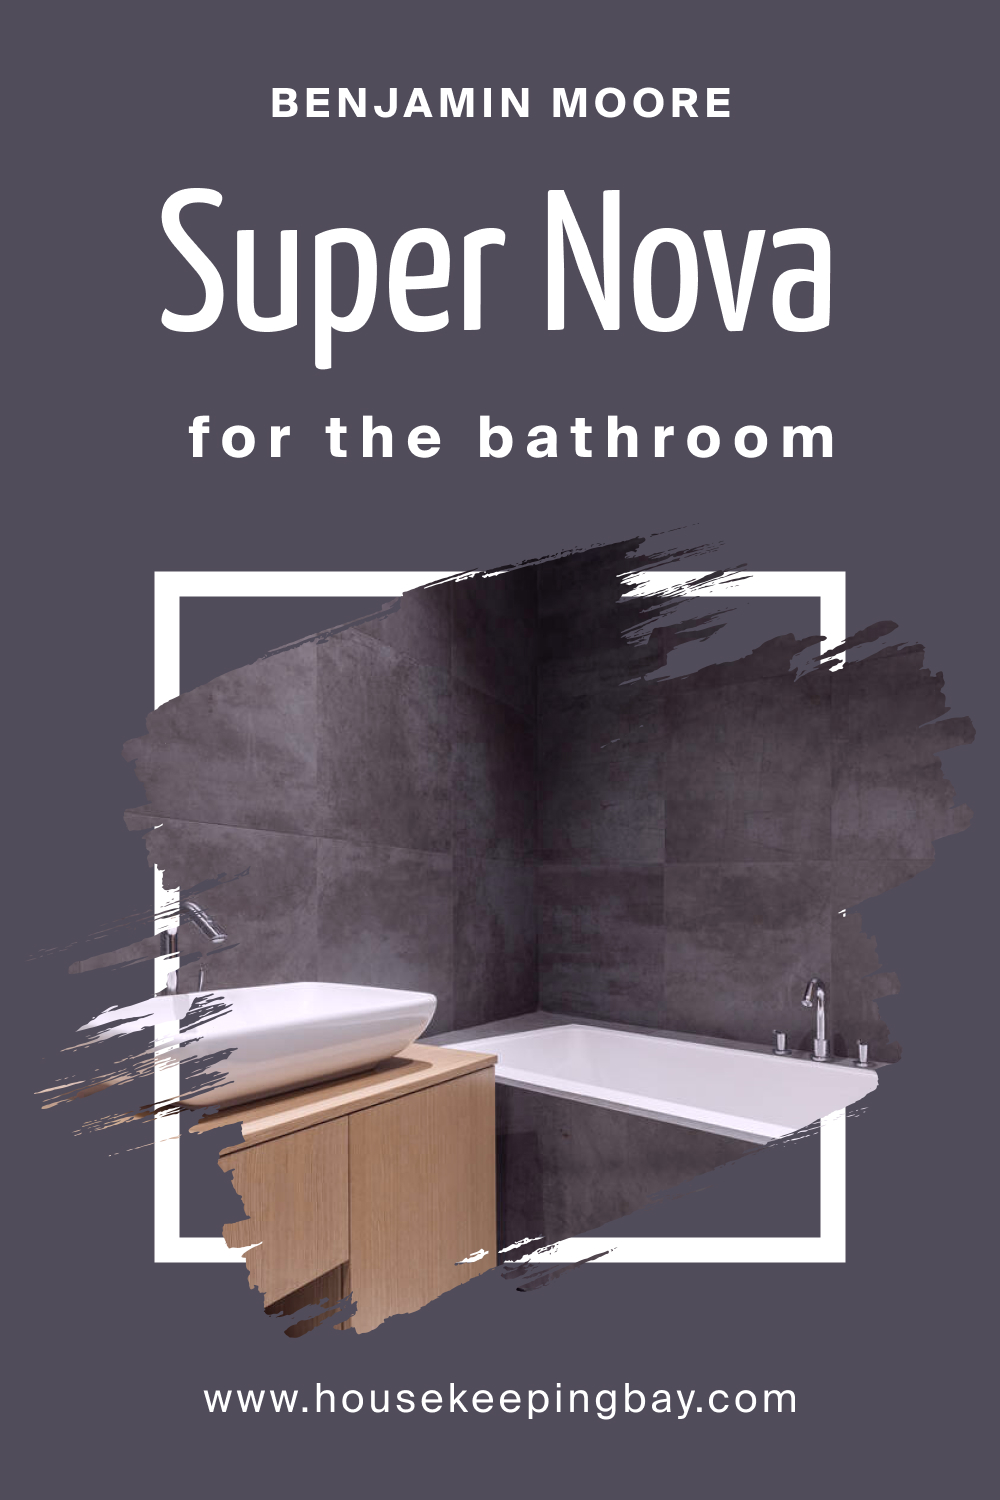 How to Use Super Nova 1414 in the Bathroom?